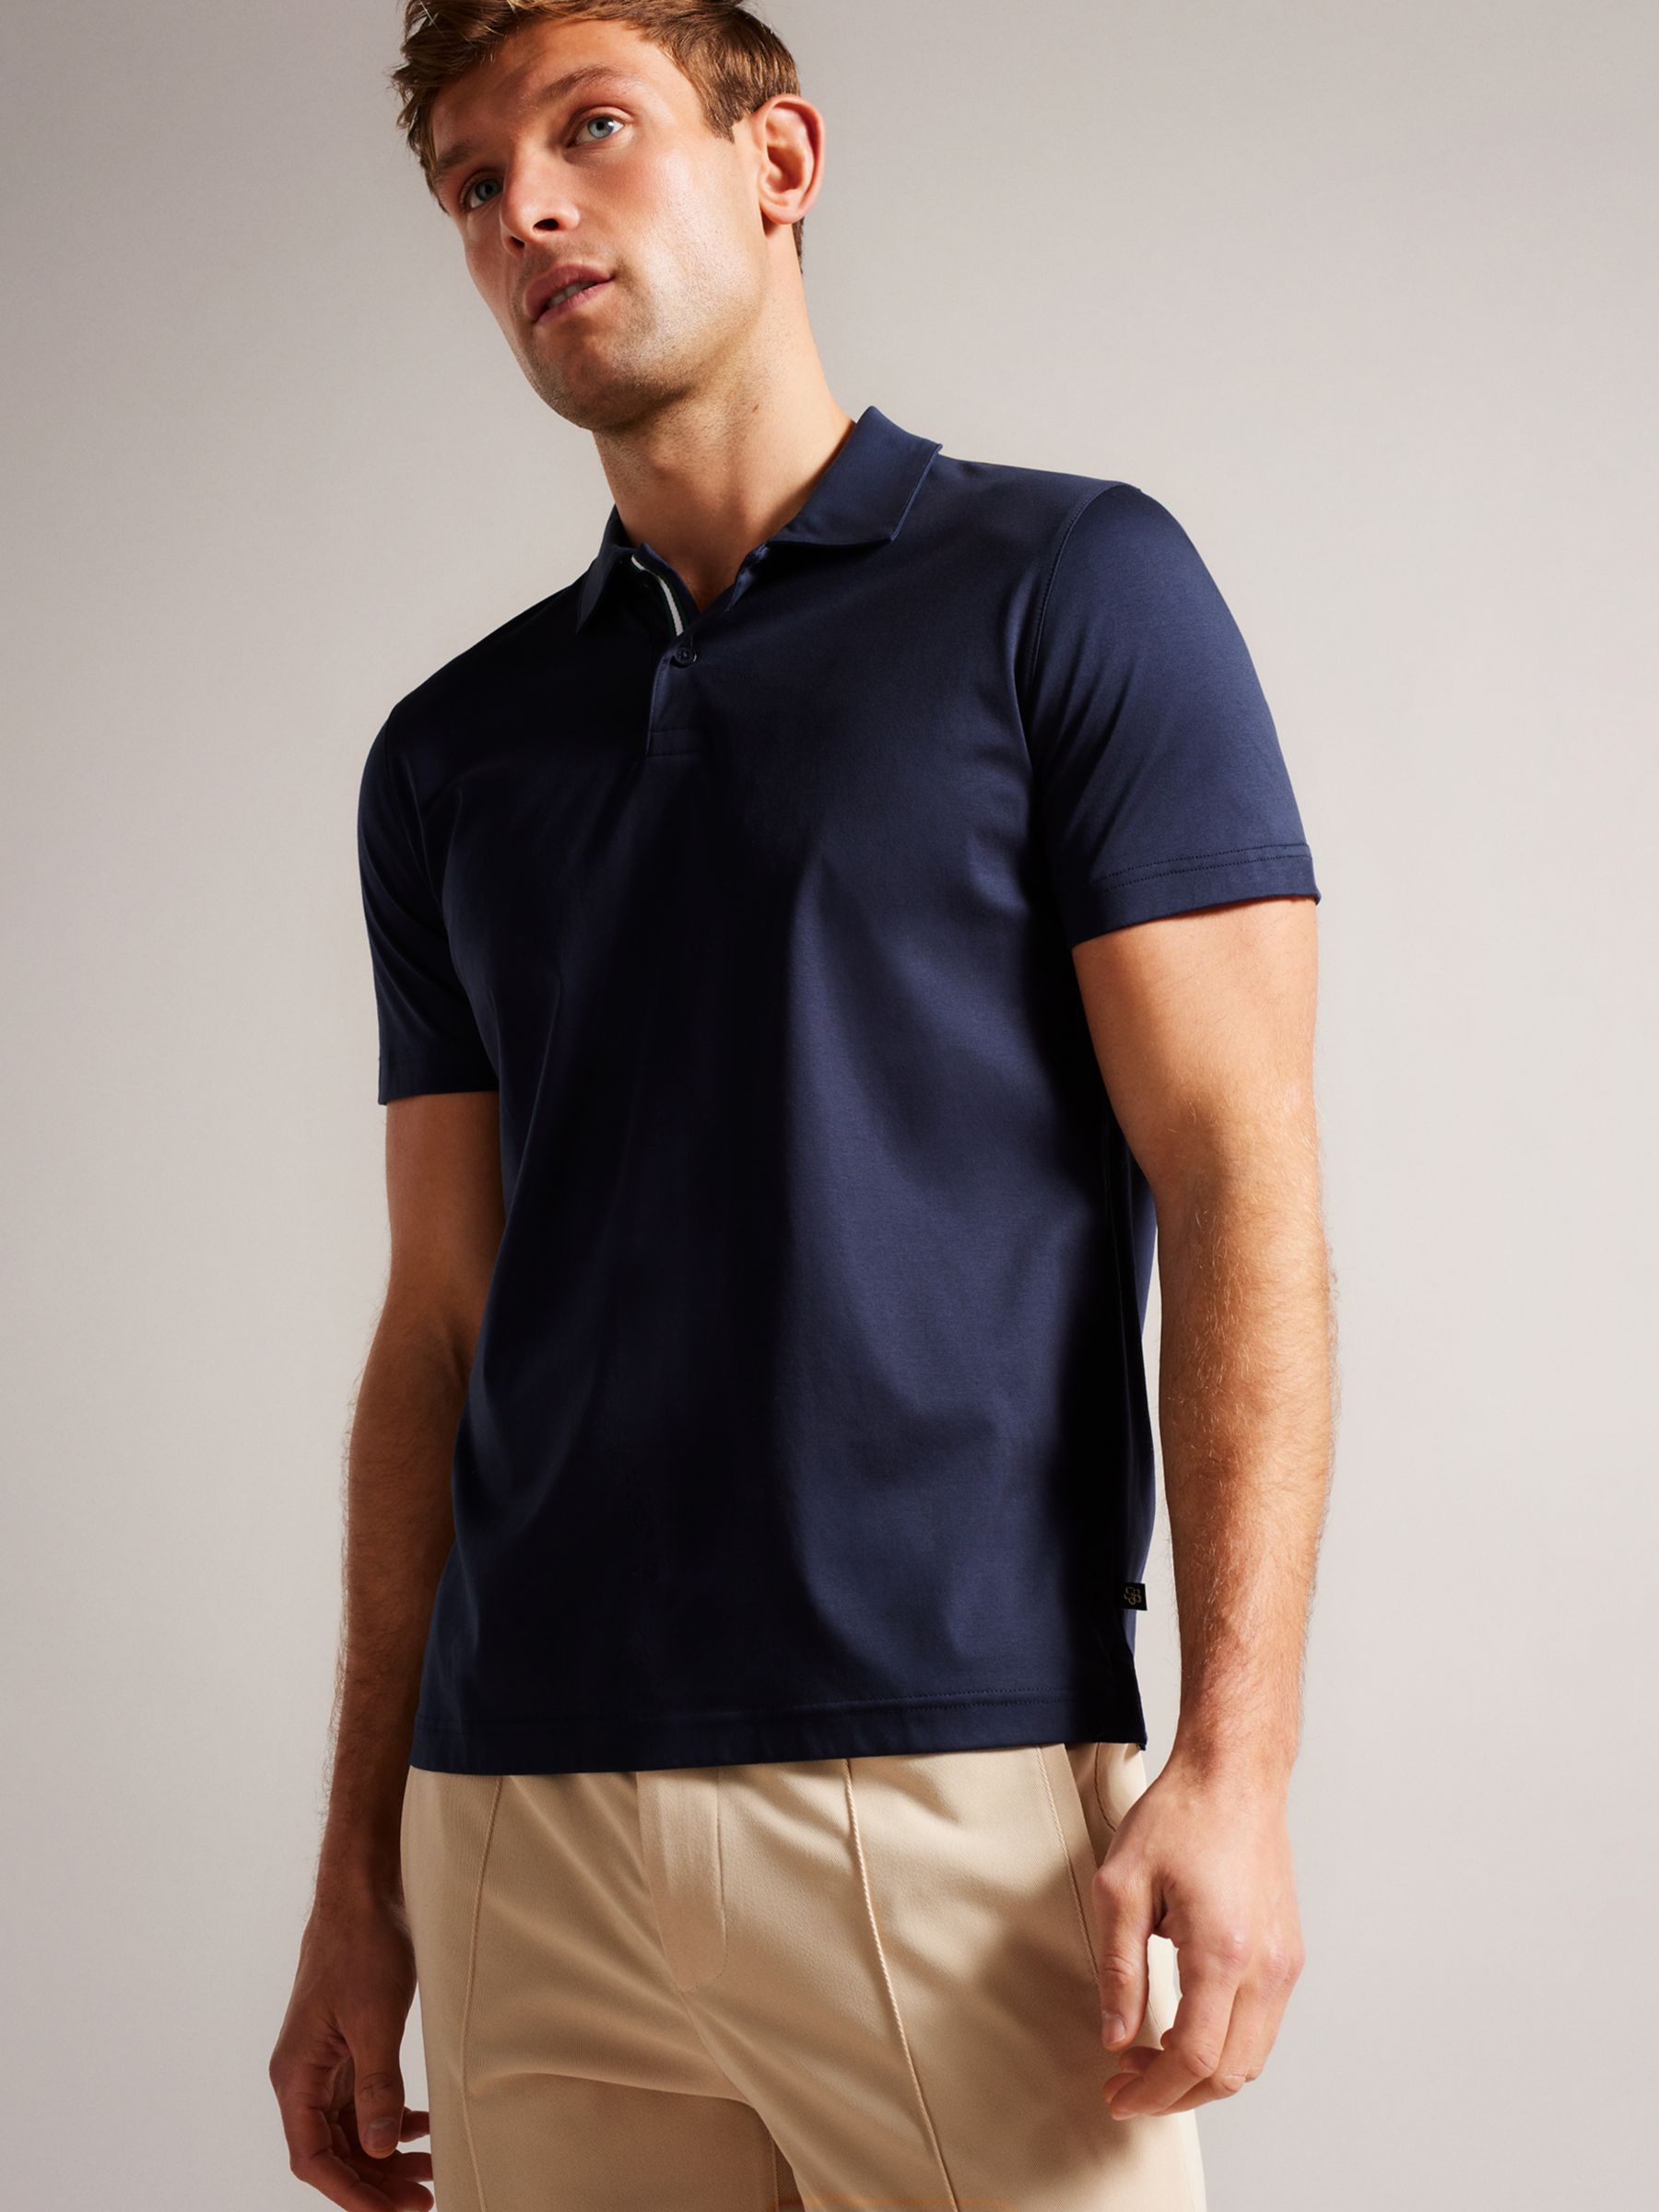 Ted Baker Zeiter Slim Fit Polo Shirt, Navy, XS